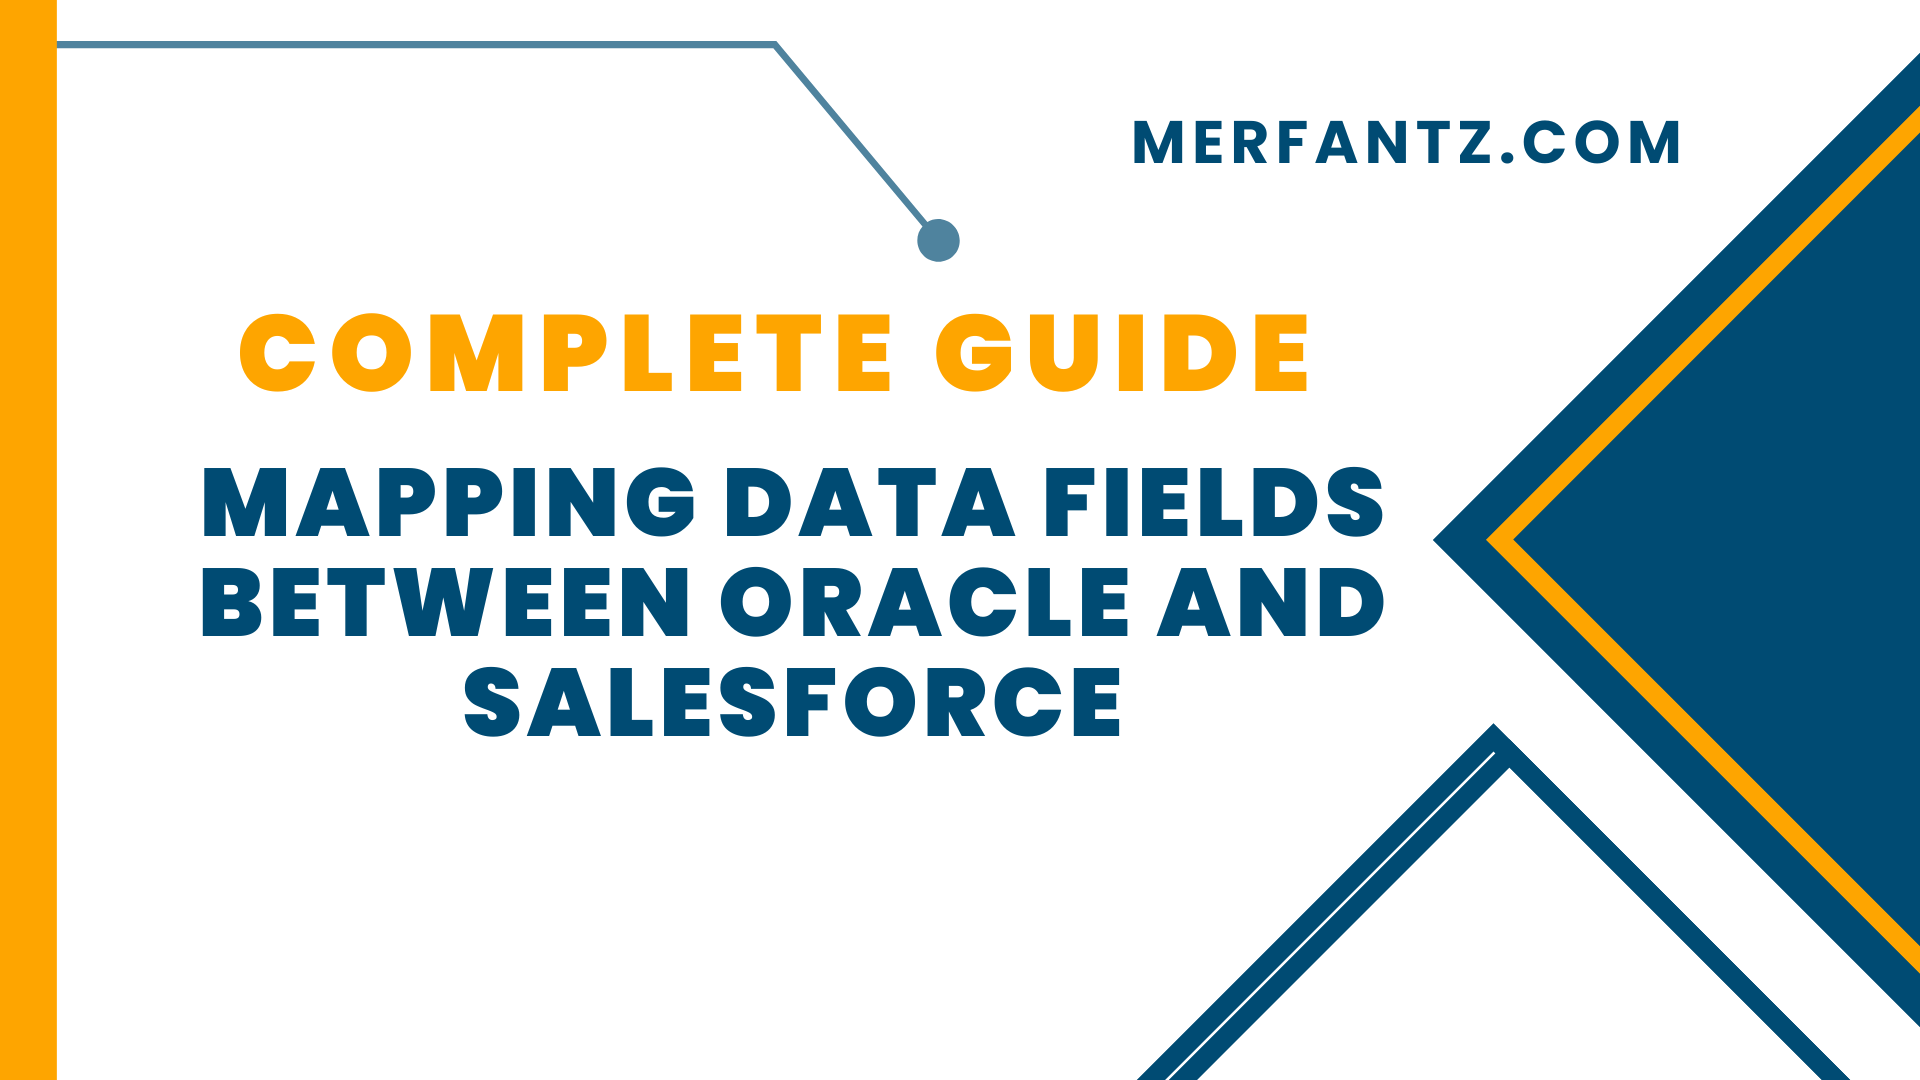 Mapping Data Fields between Oracle and Salesforce